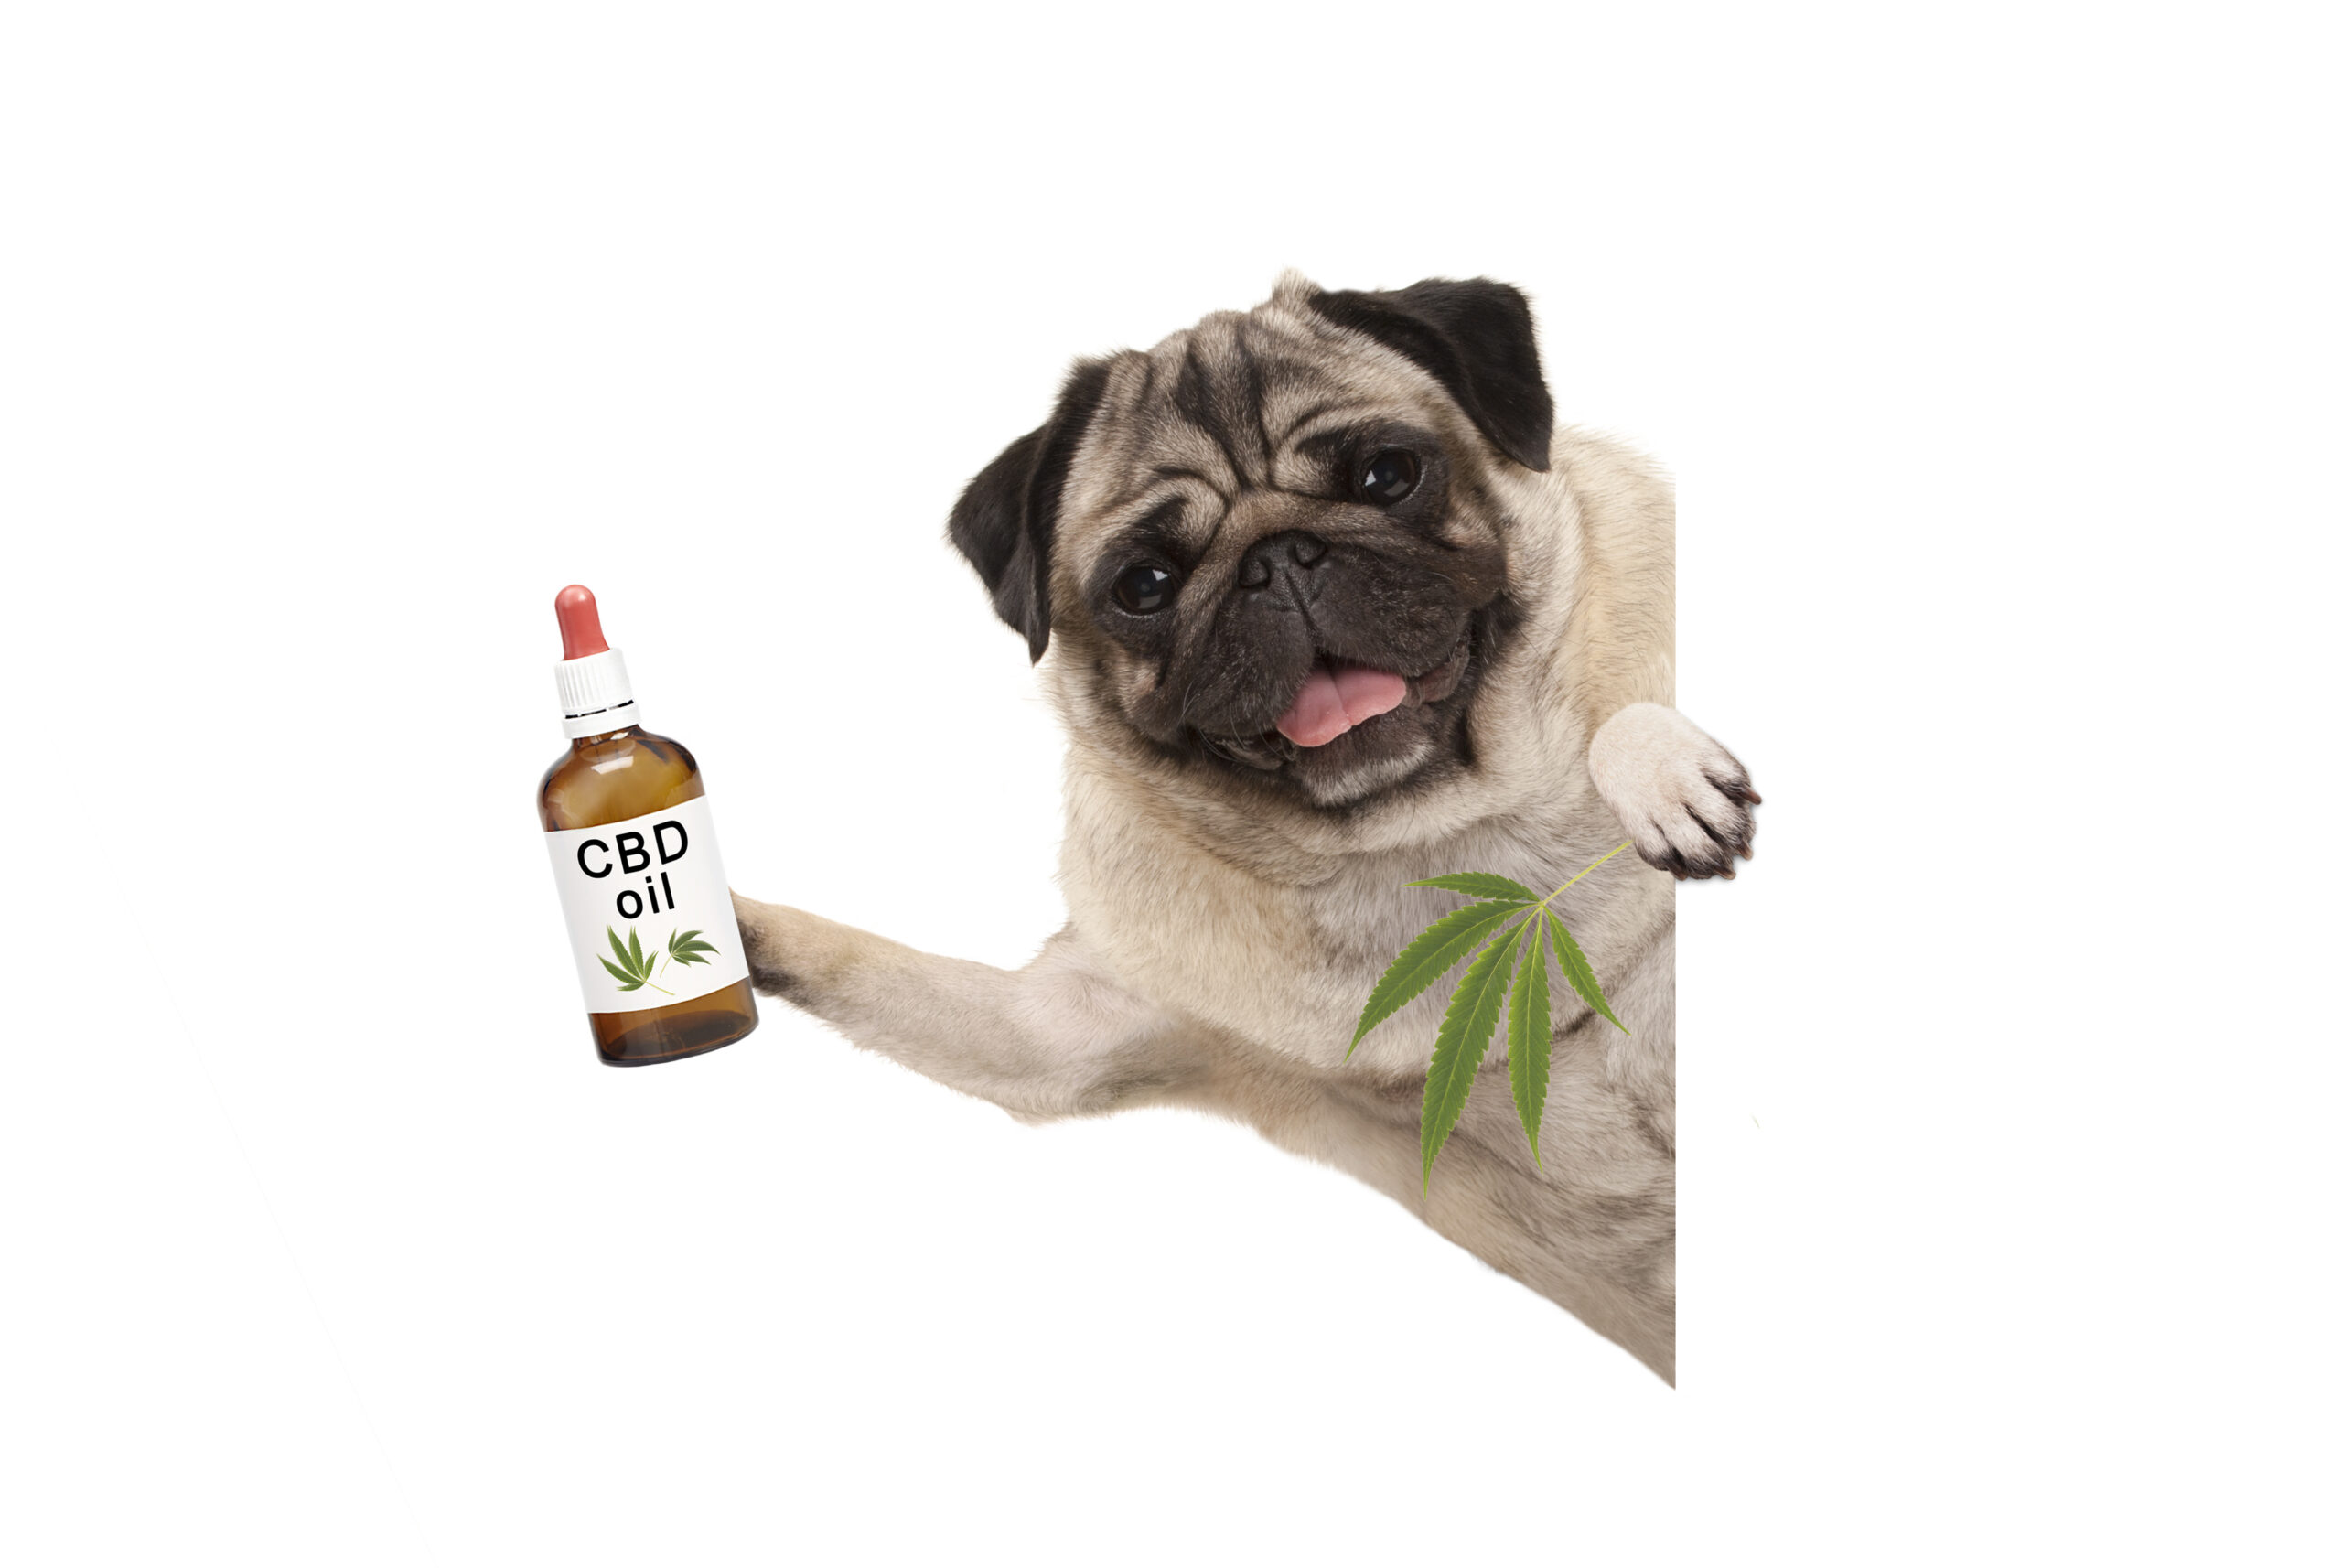 Cute smiling pug puppy dog holding up bottle of CBD oil